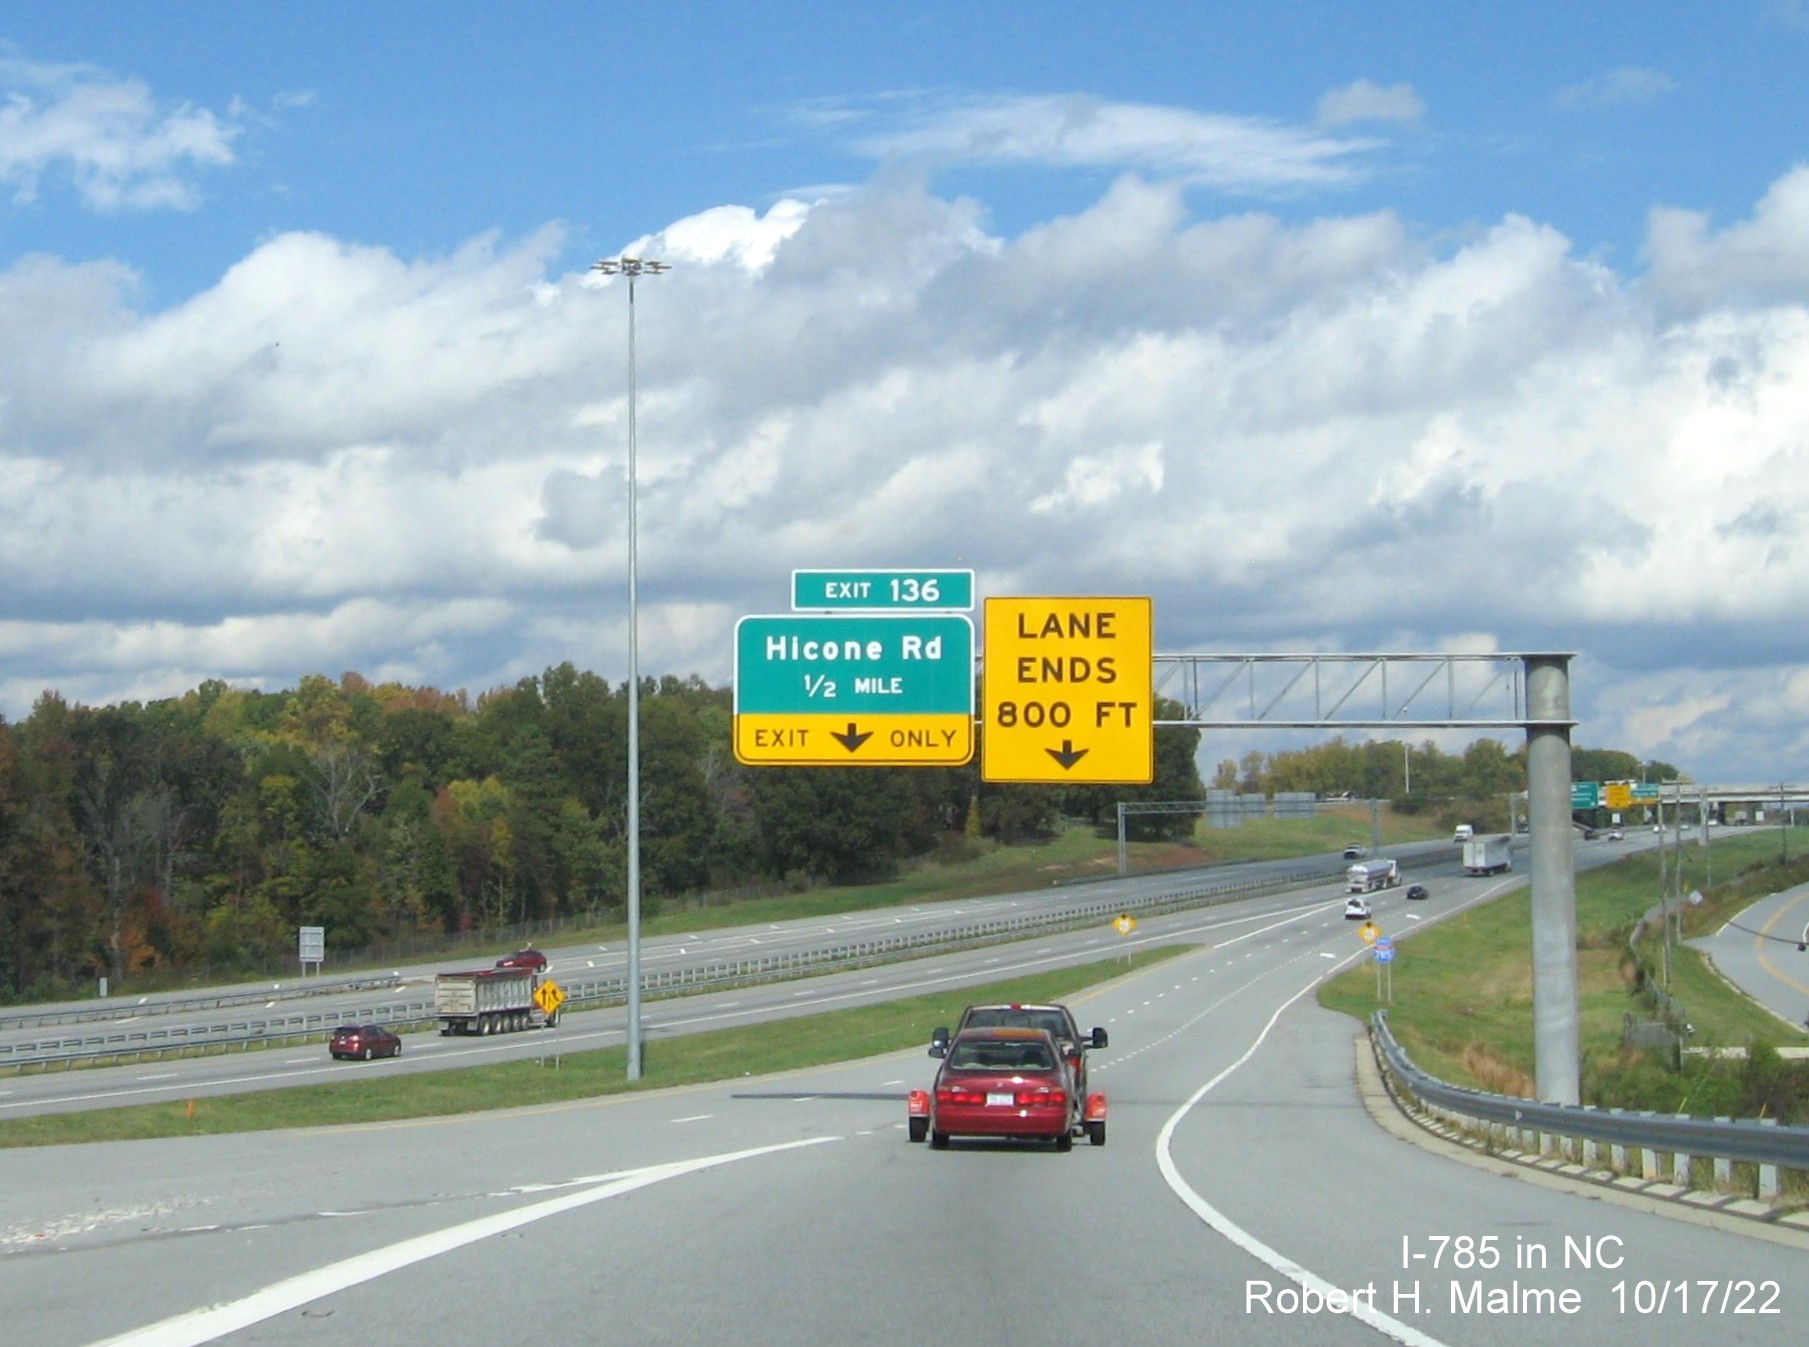 Image of 1/2 mile advance sign for Hicone Road exit on ramp to US 29 North (Future I-785) from Greensboro 
                  Urban Loop, October 2022